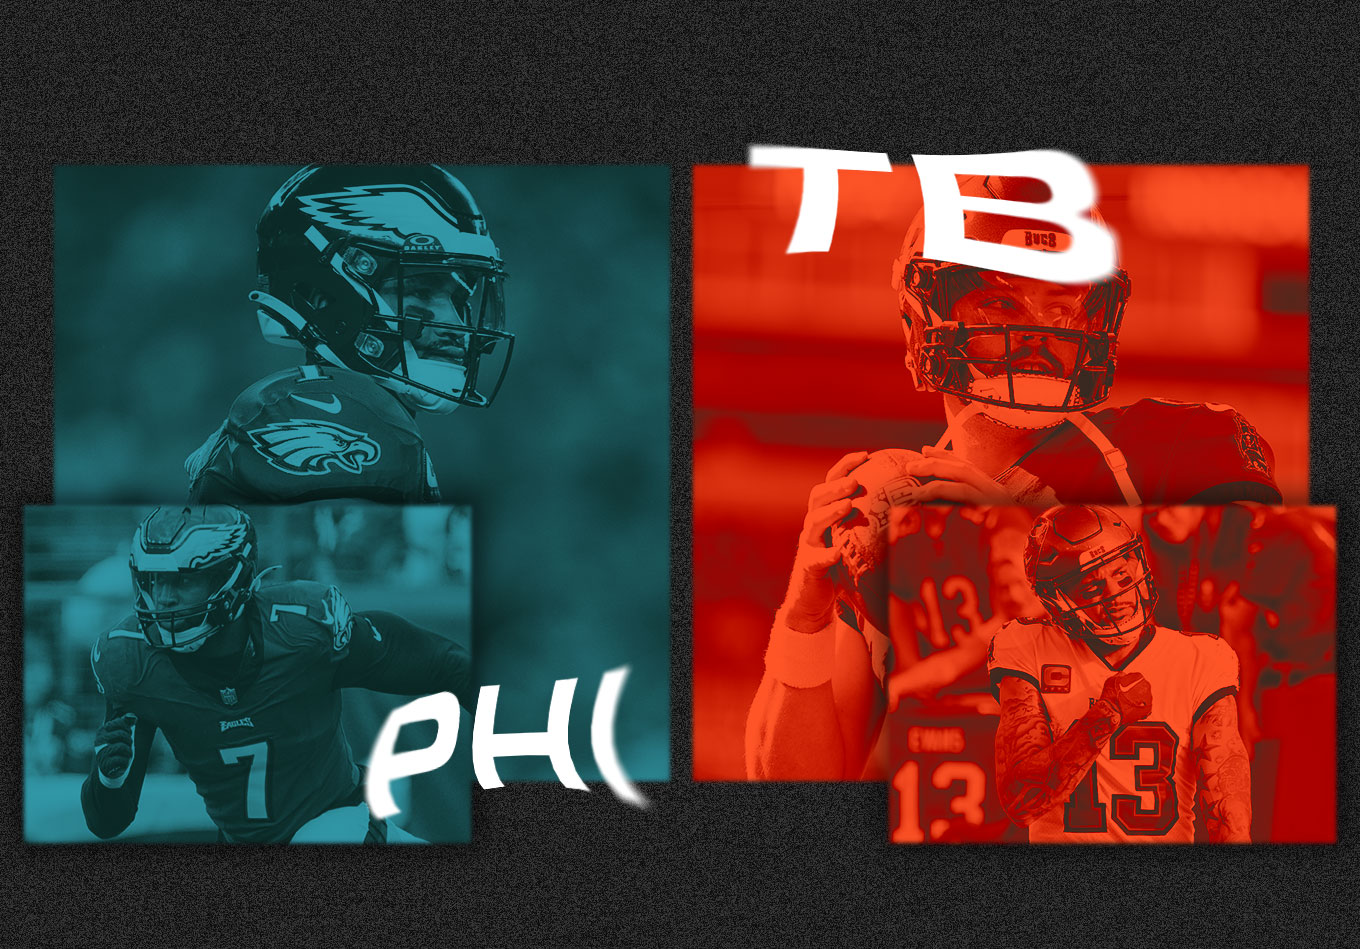 Eagles vs Bucs: Will Philly Stop Its Slide and Start Another Super Bowl Run?